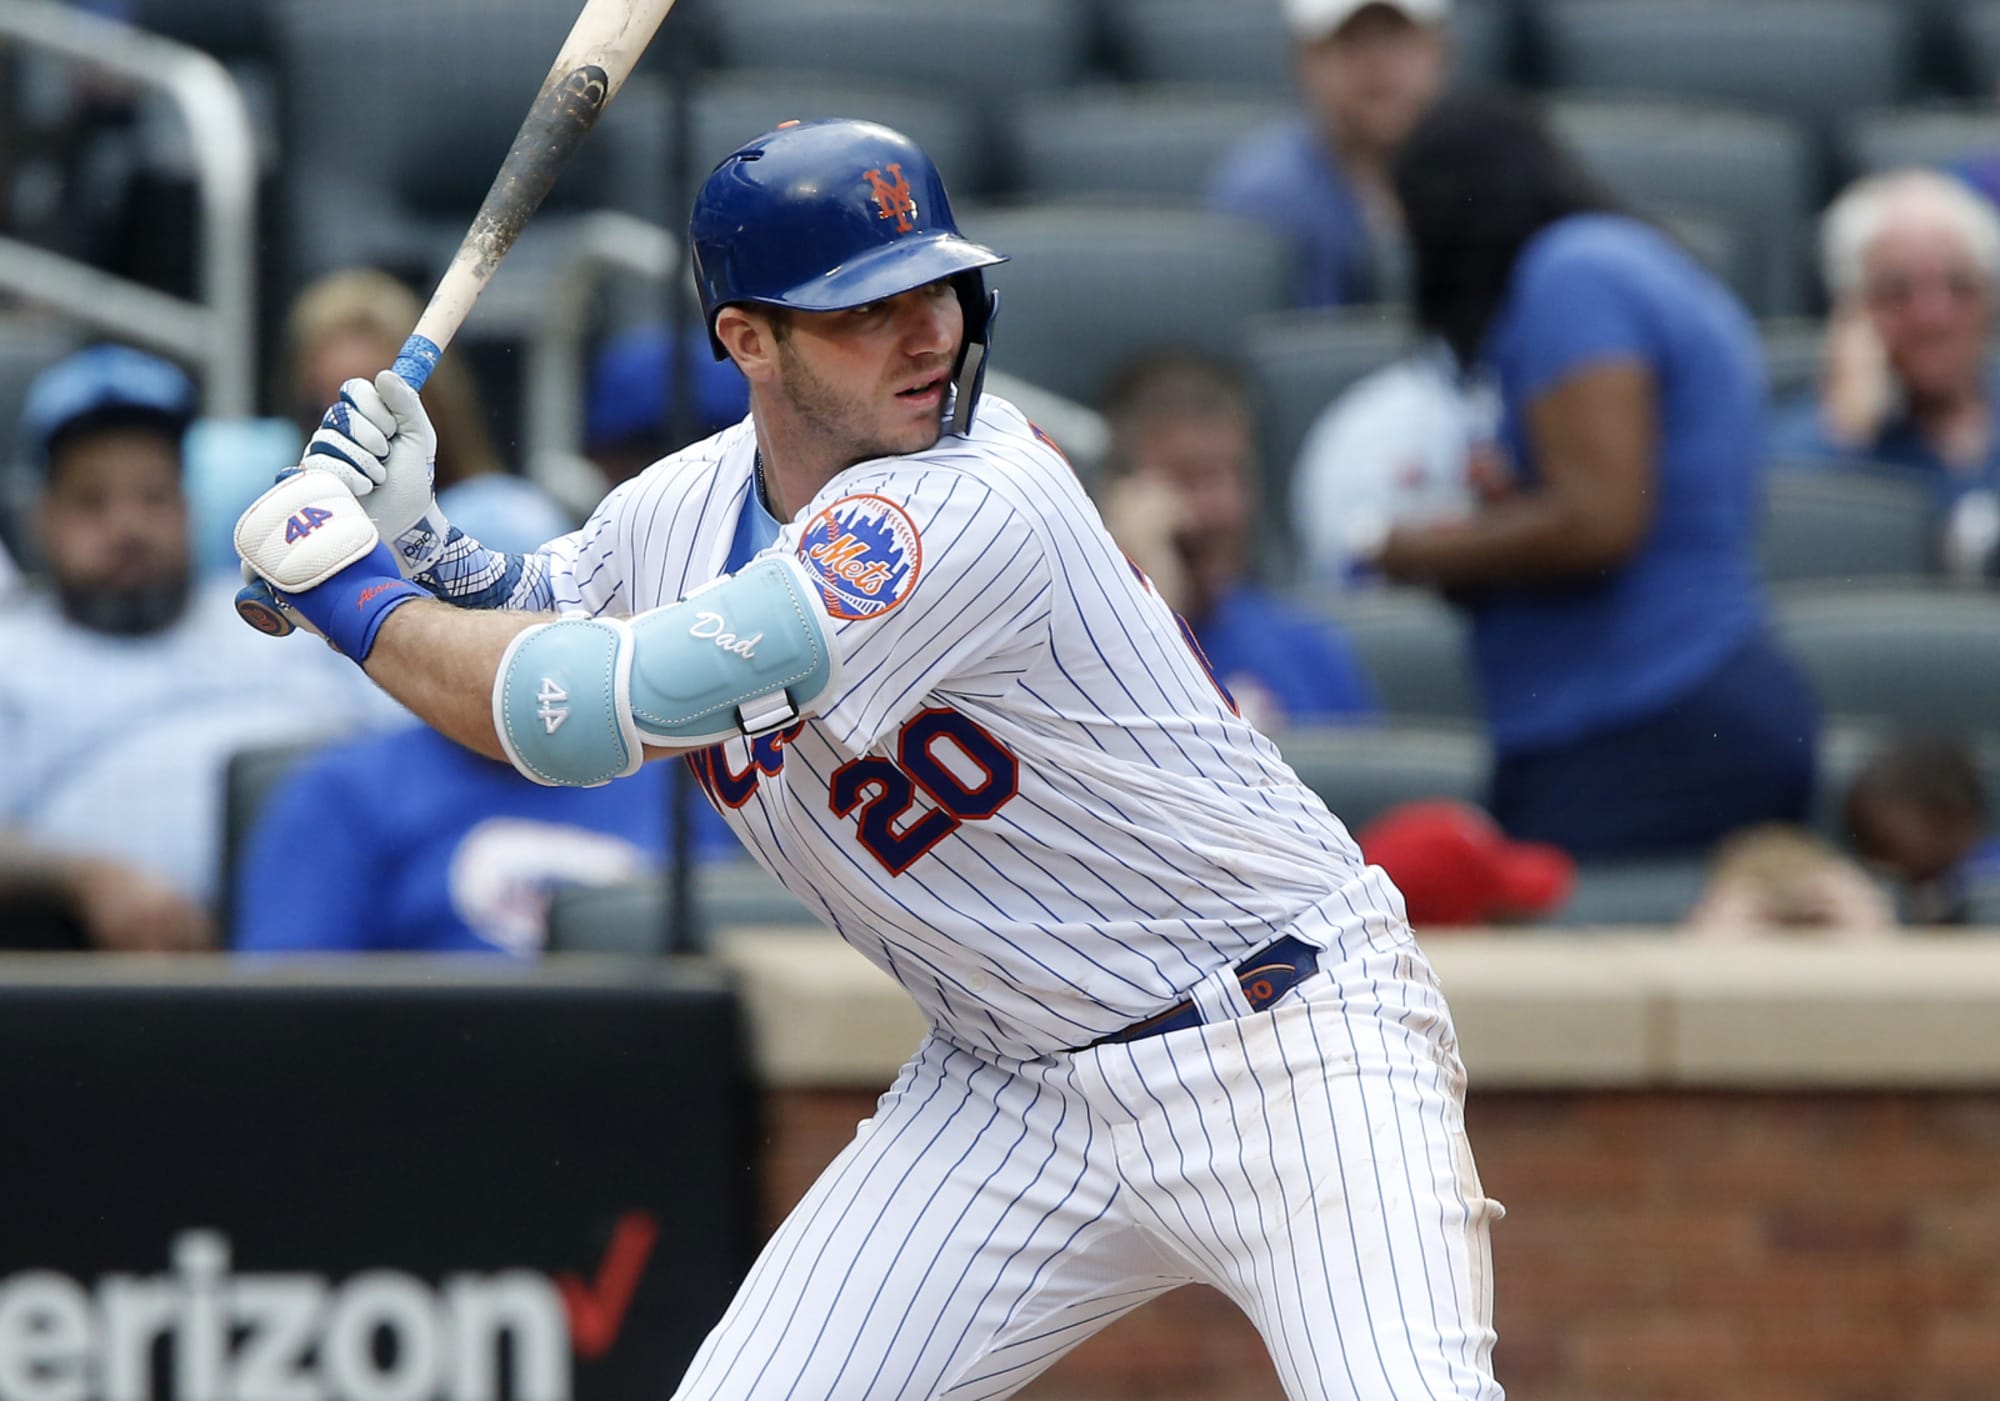 Pete Alonso of the New York Mets breaks MLB's rookie home run